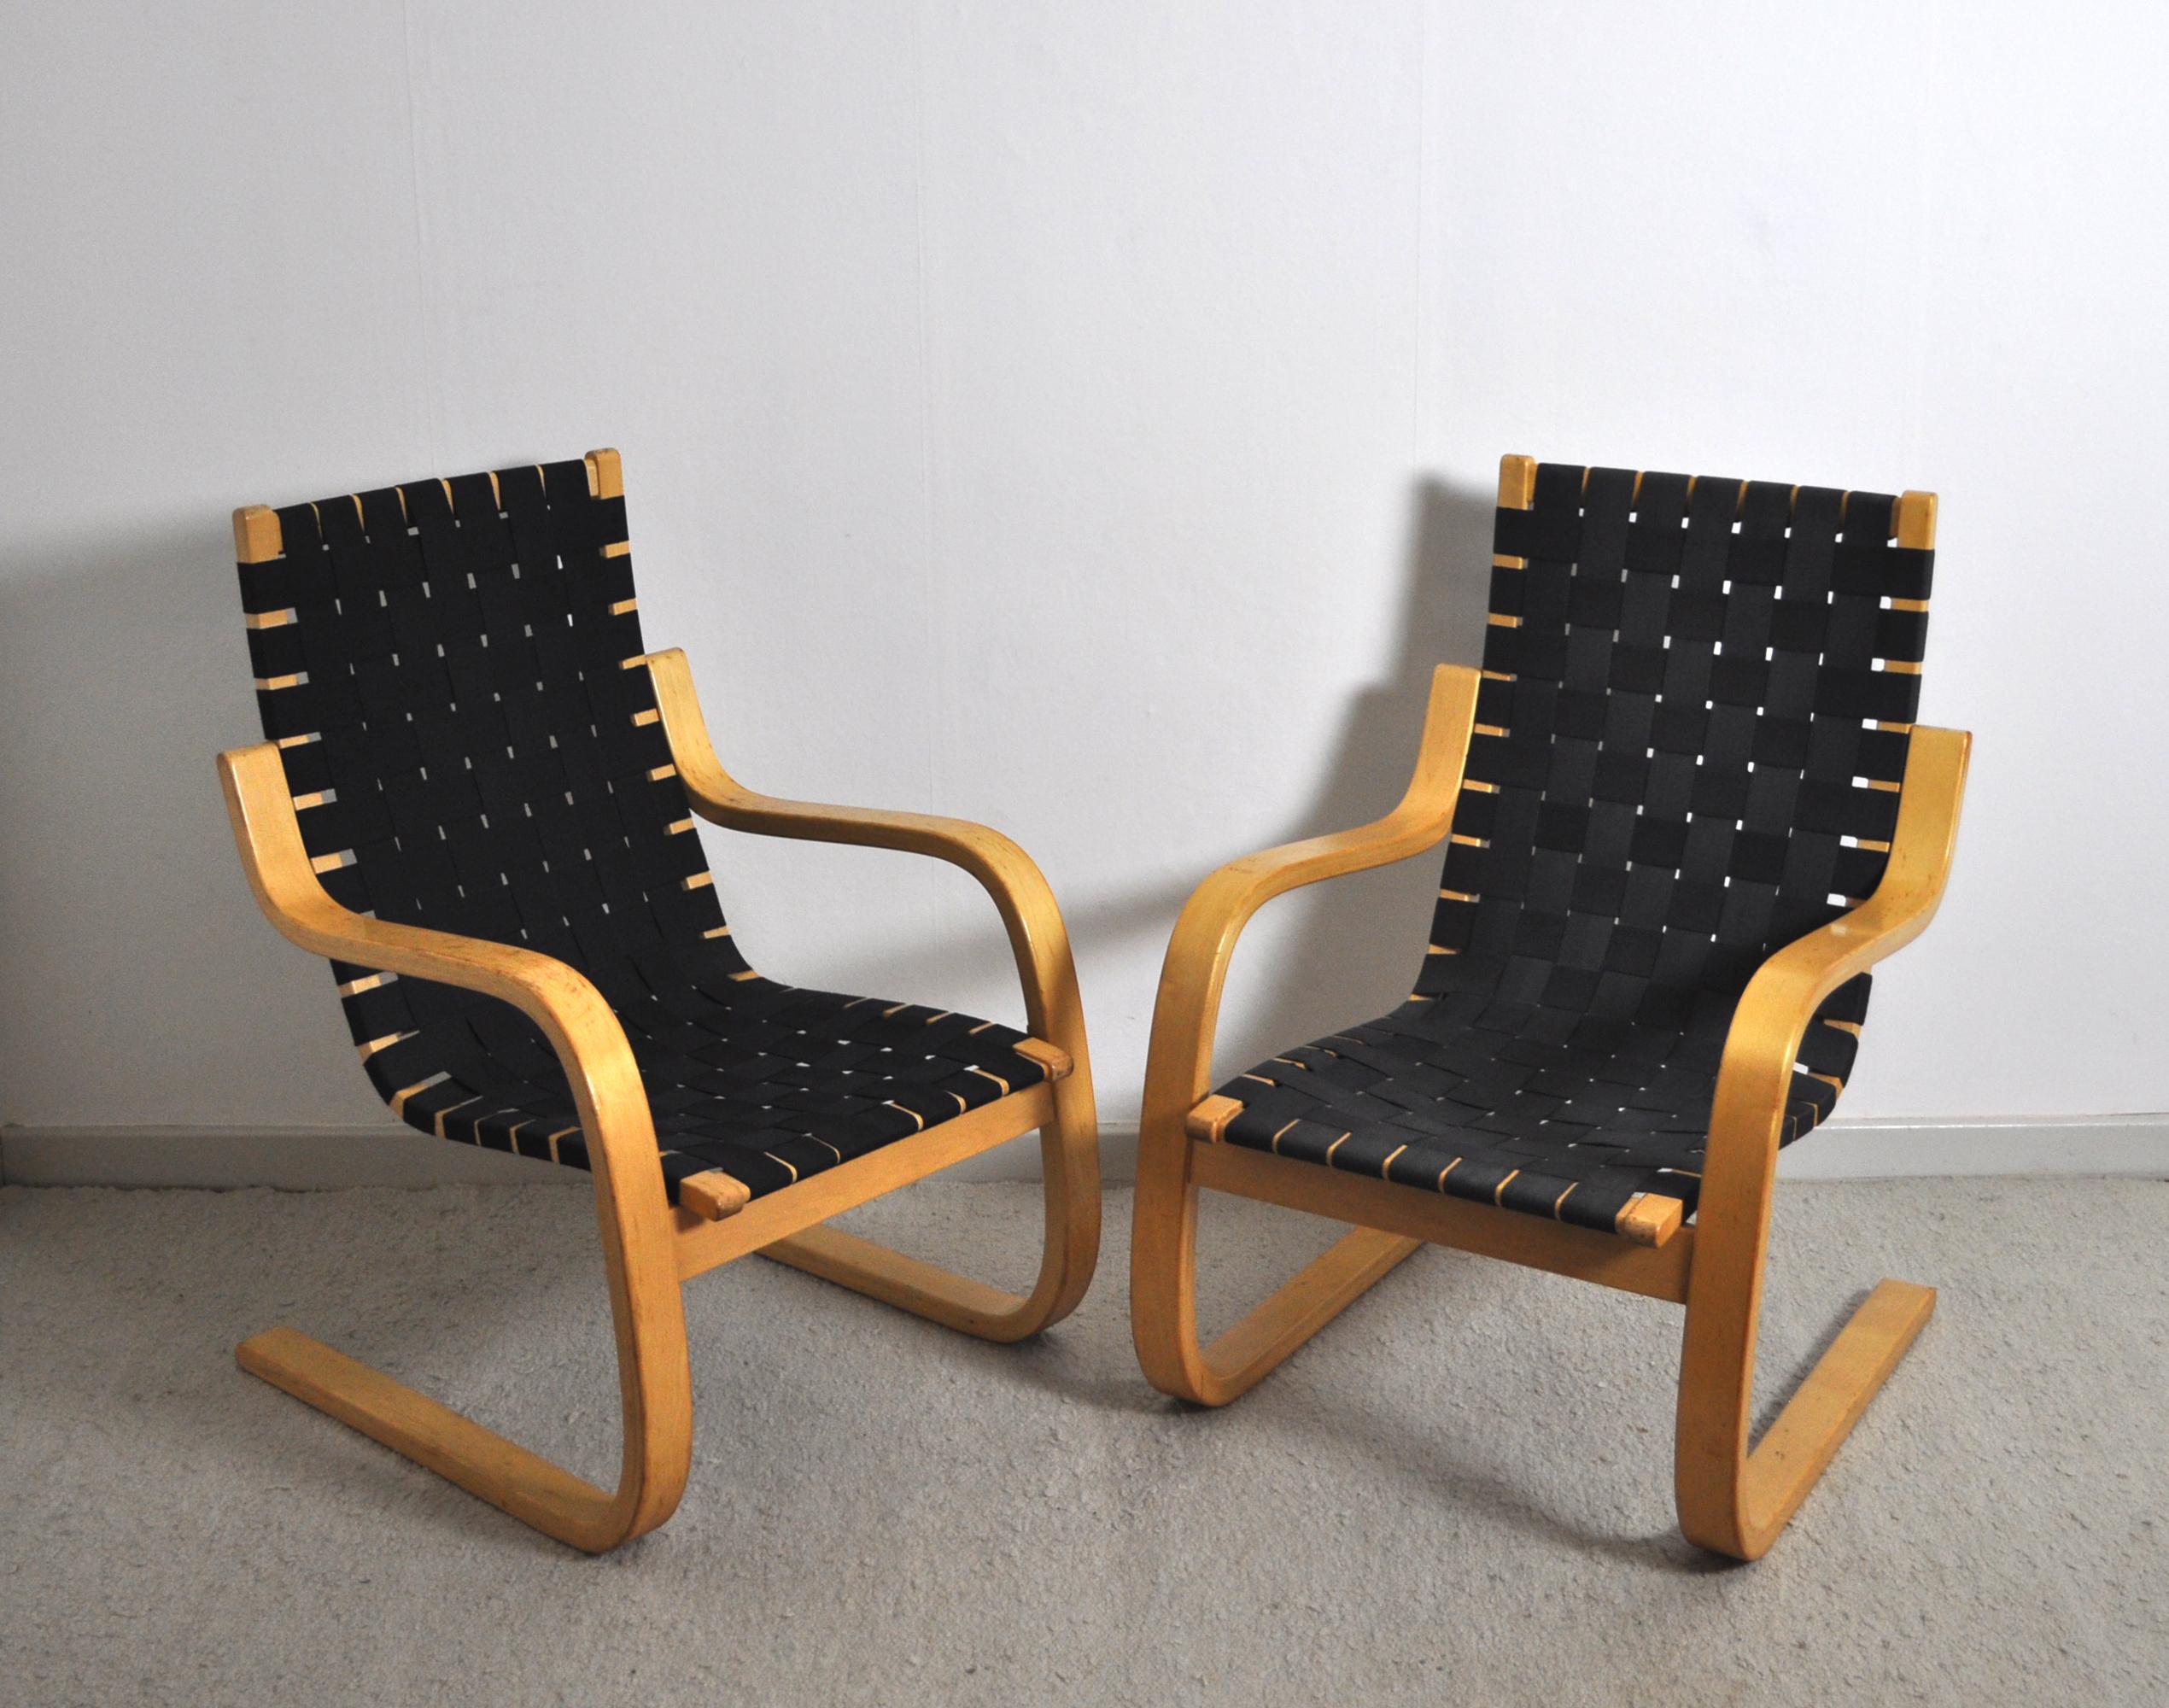 Cantilevered lounge chairs model 406 designed by Alvar Aalto for Artek. Bent laminated birch wood frames with woven canvas strapped seating. In original condition with some fading to the strapping and wear to the frame. 
Good vintage condition with